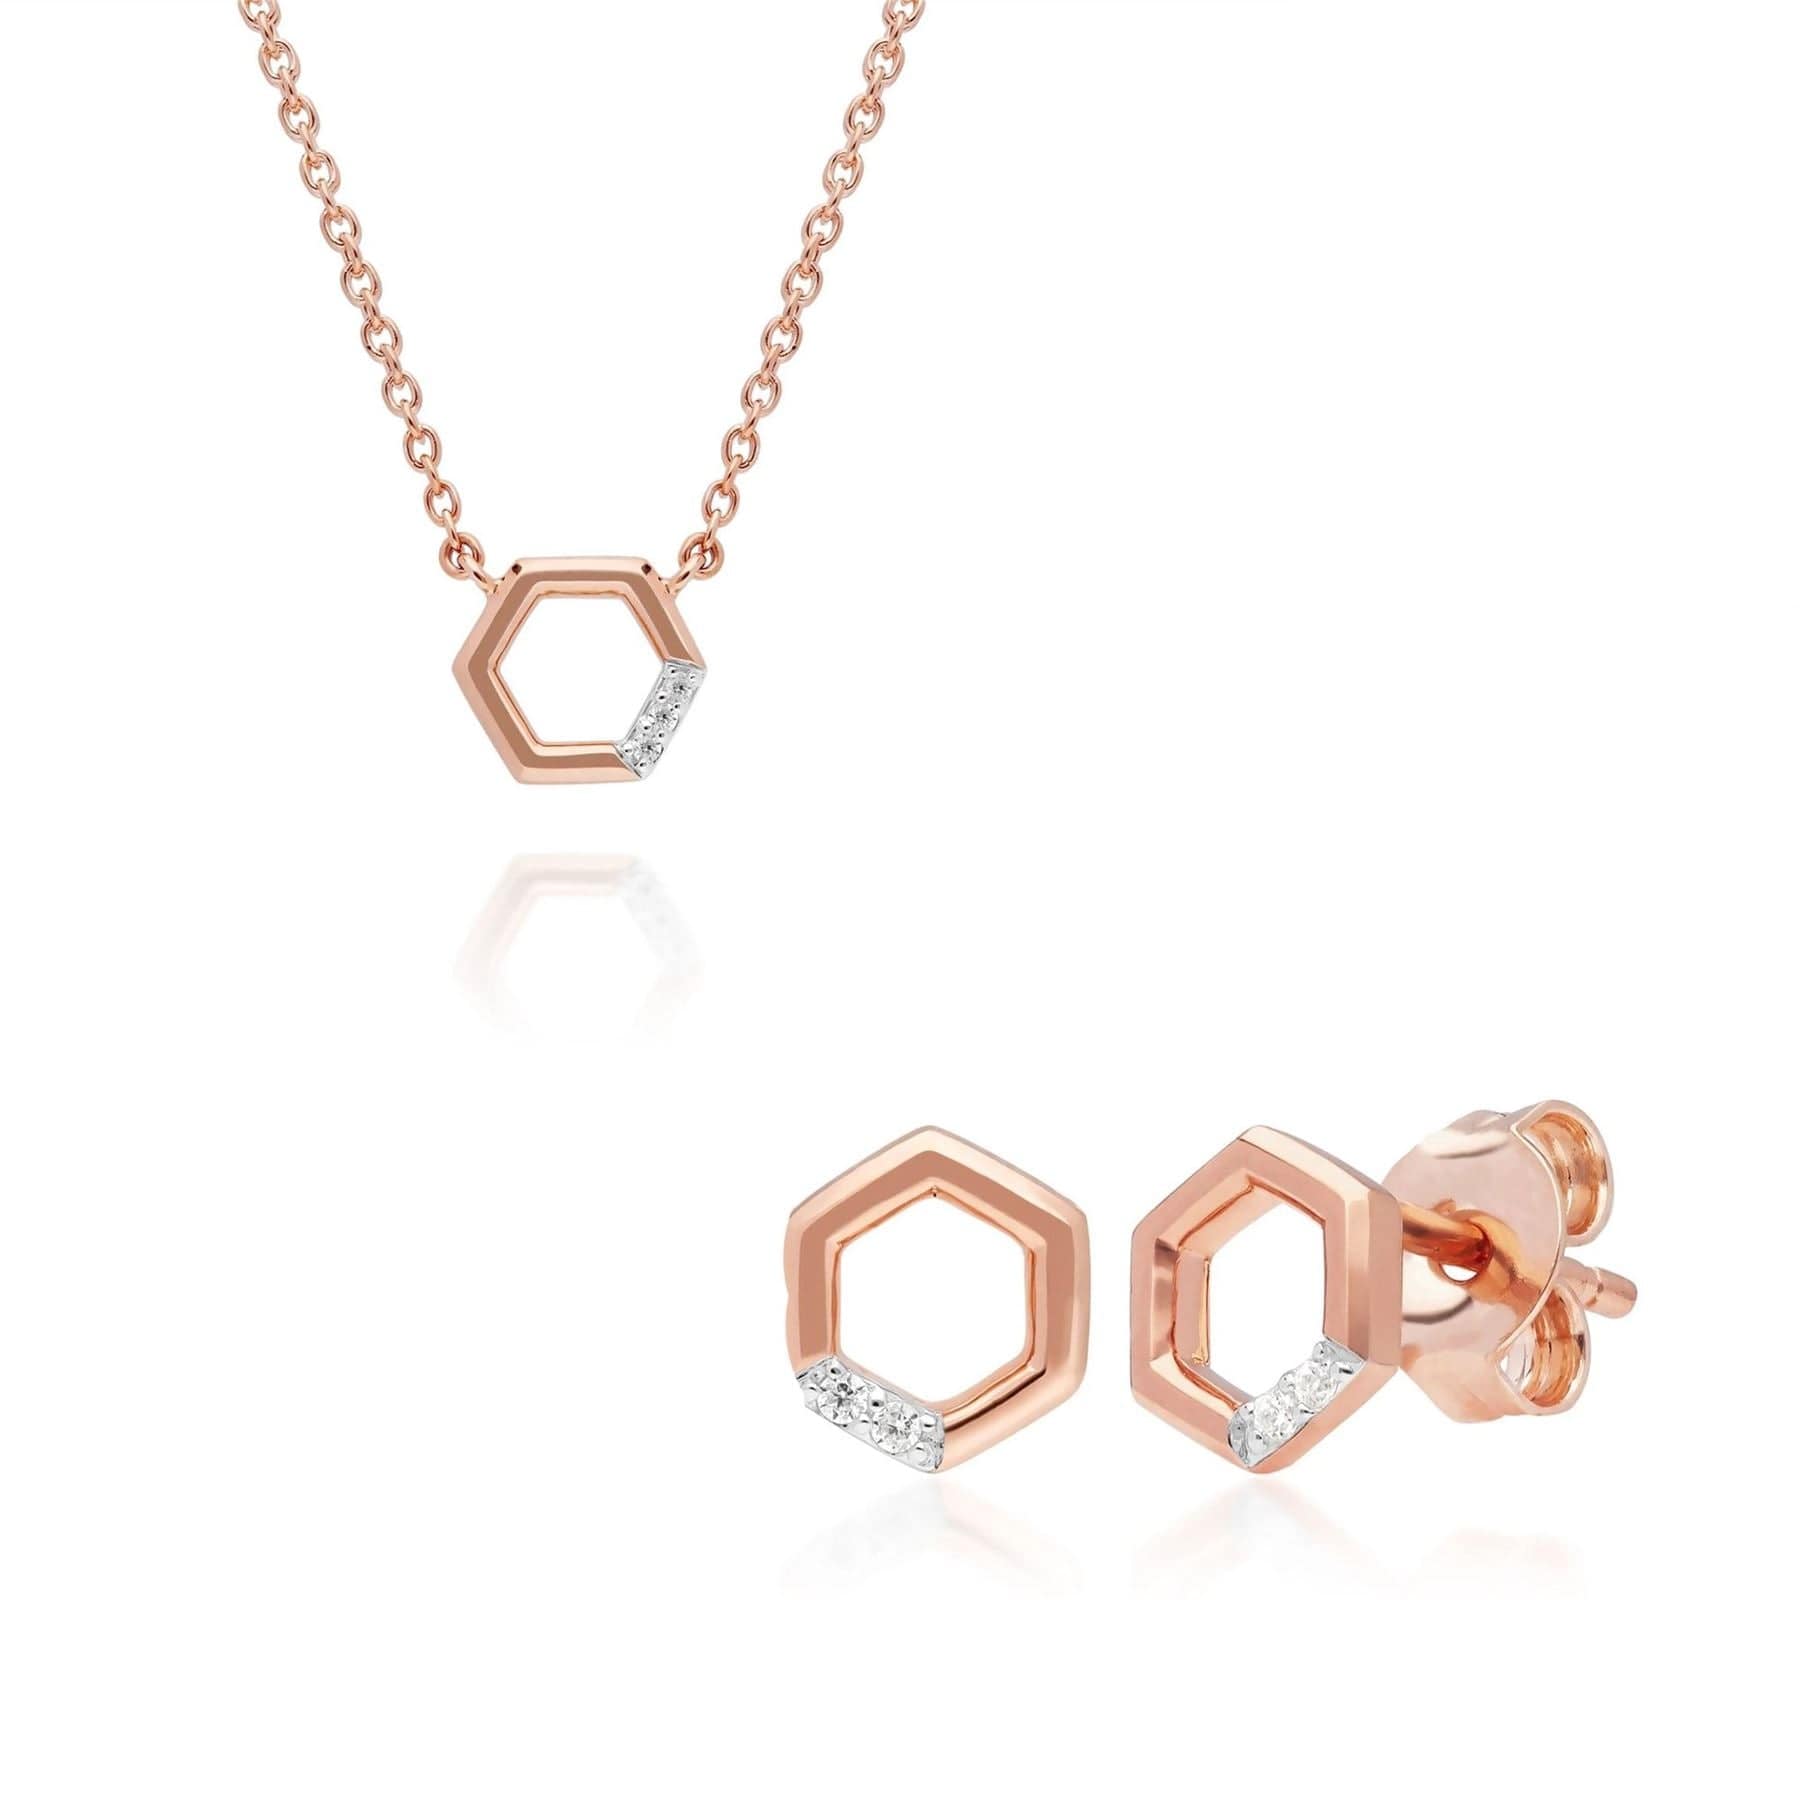 191N0230019-191E0400019 Diamond Pave Hexagon Necklace & Stud Earring Set in 9ct Rose Gold 1